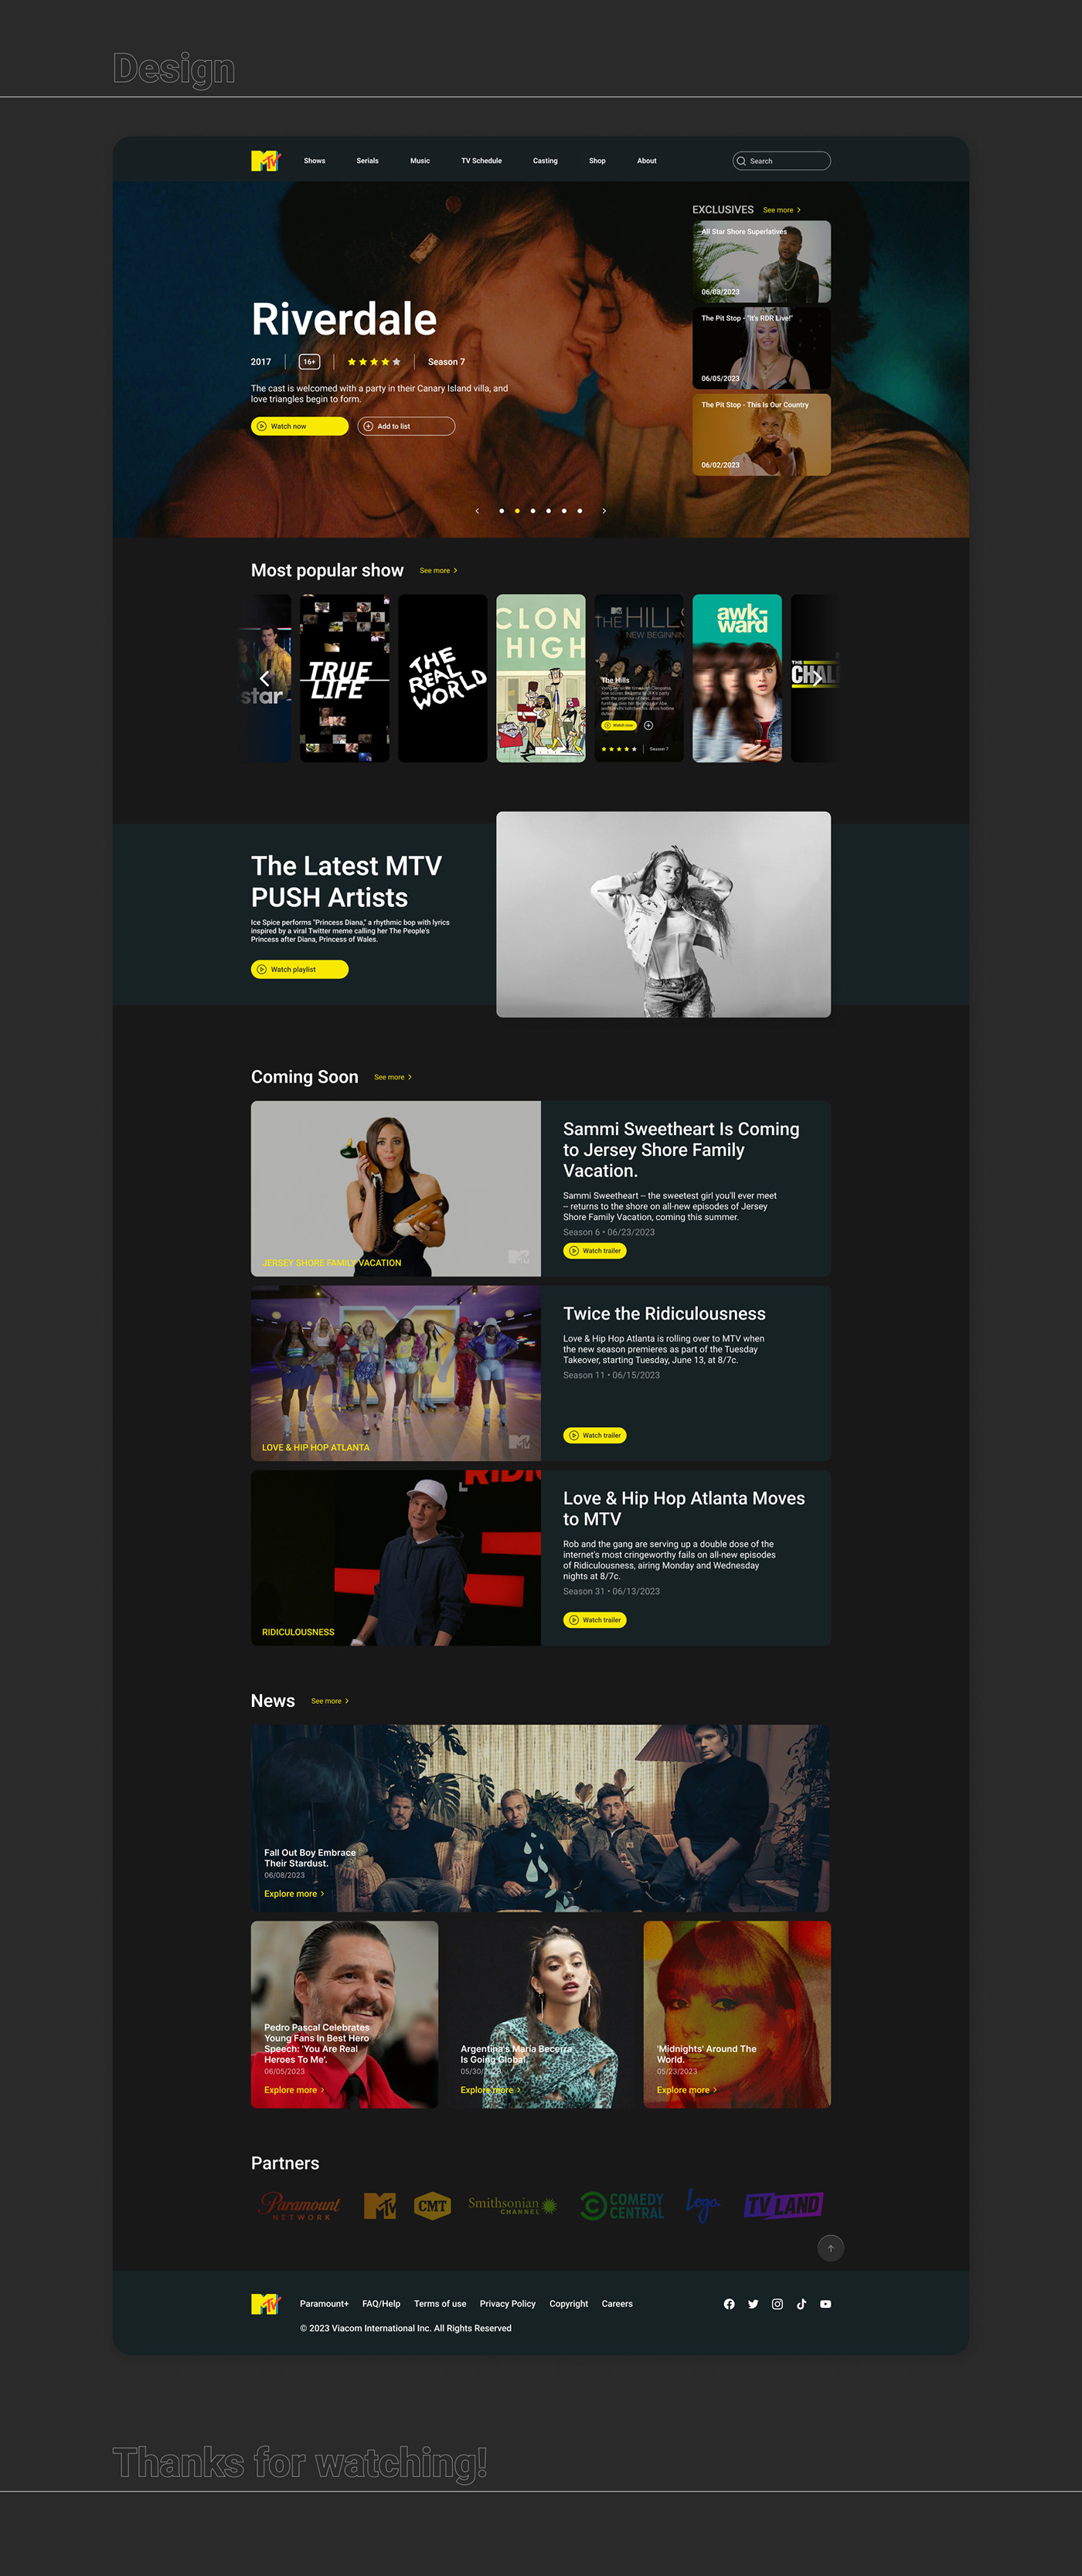 redesign landing page Show music riverdale serial UI/UX user interface Mtv